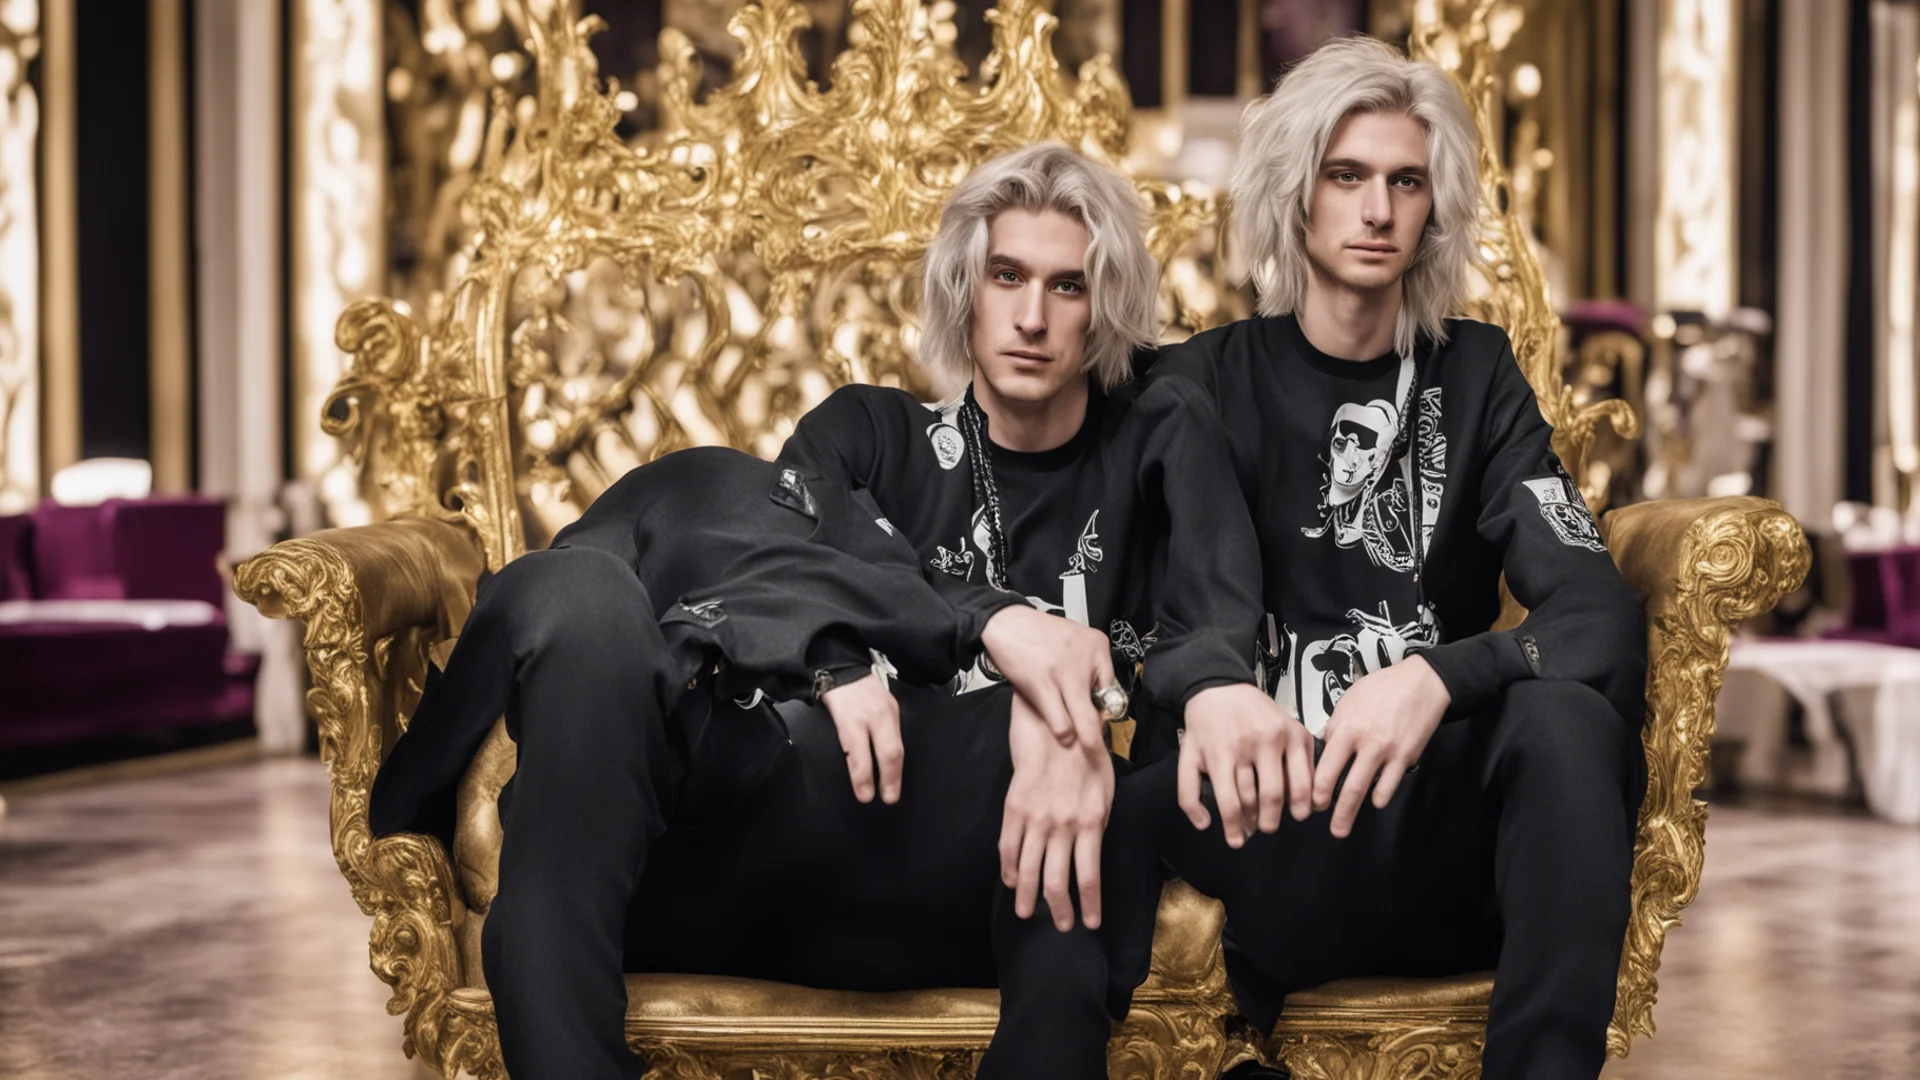 xqc sitting on s casino throne amazing awesome portrait 2 wide